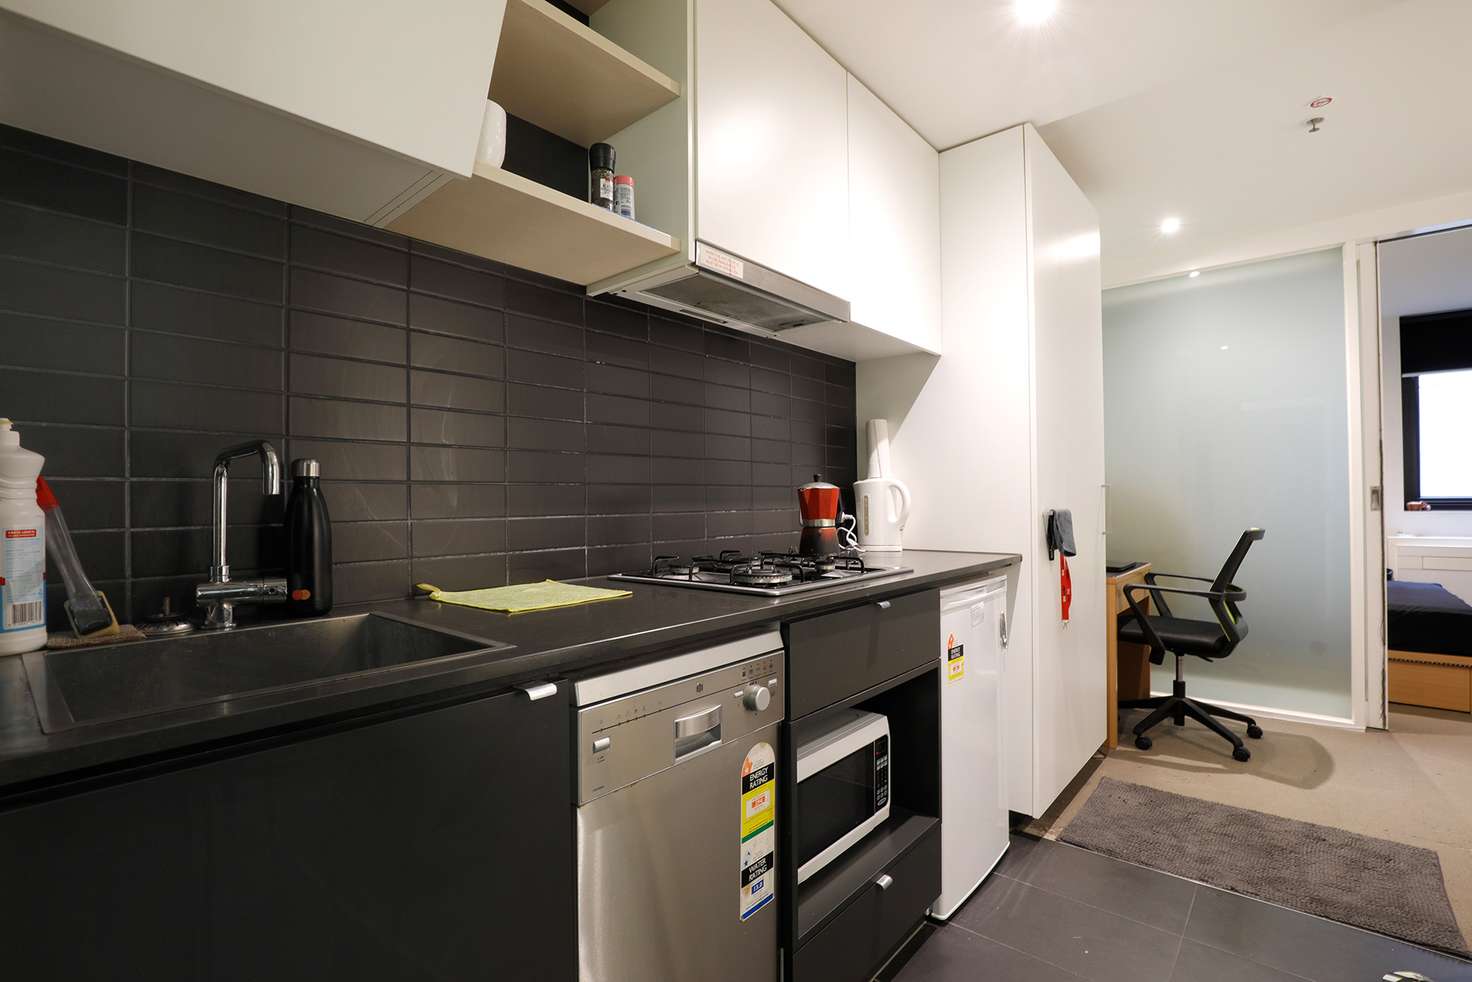 Main view of Homely apartment listing, 55 Villiers Street, North Melbourne VIC 3051